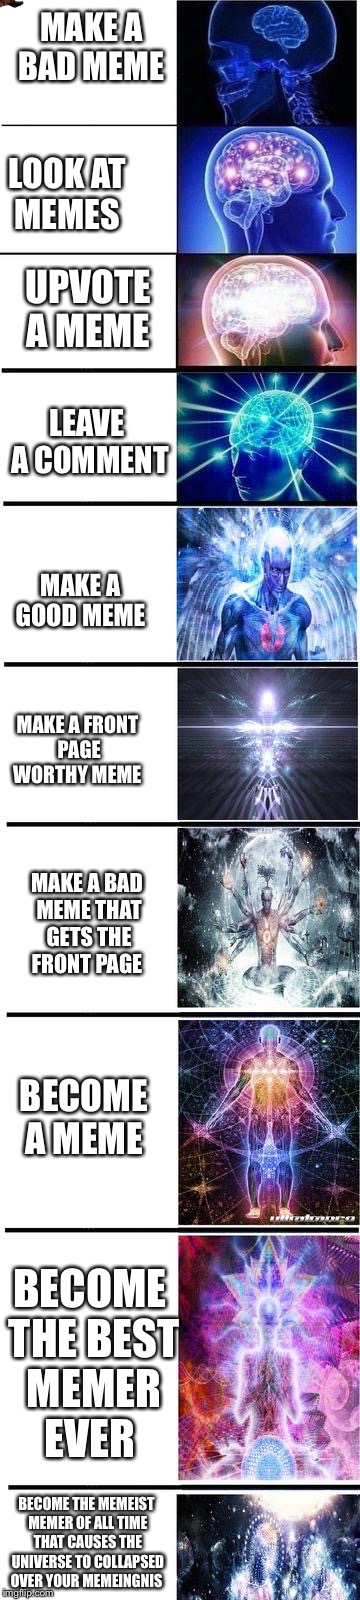 expanding brain | MAKE A BAD MEME; LOOK AT MEMES; UPVOTE A MEME; LEAVE A COMMENT; MAKE A GOOD MEME; MAKE A FRONT PAGE WORTHY MEME; MAKE A BAD MEME THAT GETS THE FRONT PAGE; BECOME A MEME; BECOME THE BEST MEMER EVER; BECOME THE MEMEIST MEMER OF ALL TIME THAT CAUSES THE UNIVERSE TO COLLAPSED OVER YOUR MEMEINGNIS | image tagged in expanding brain,scumbag | made w/ Imgflip meme maker